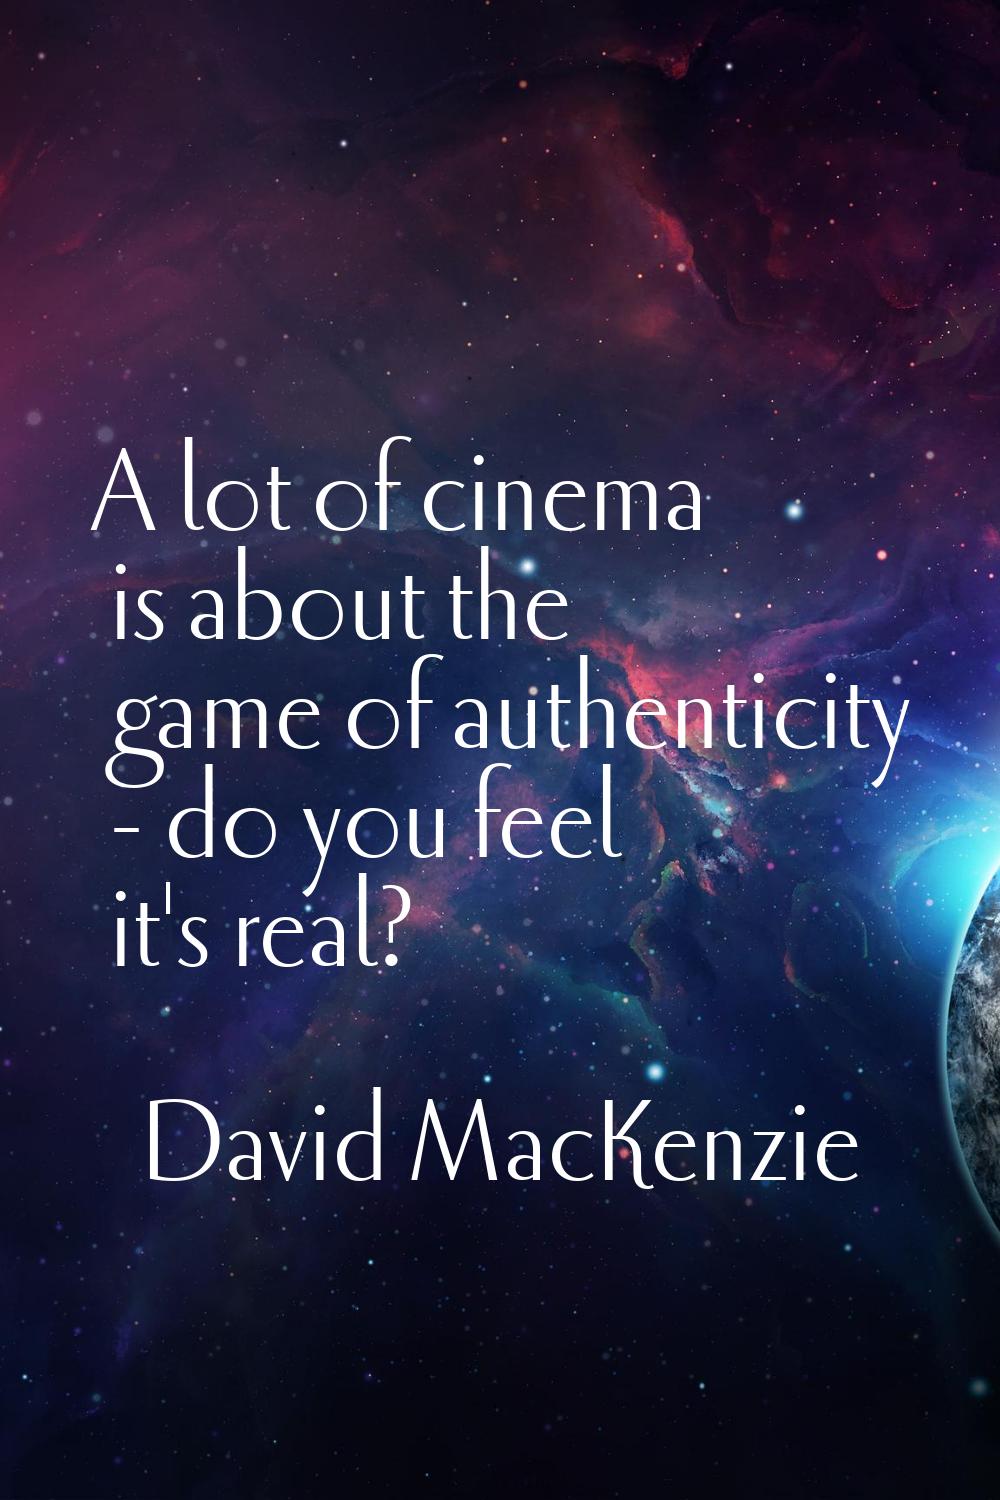 A lot of cinema is about the game of authenticity - do you feel it's real?